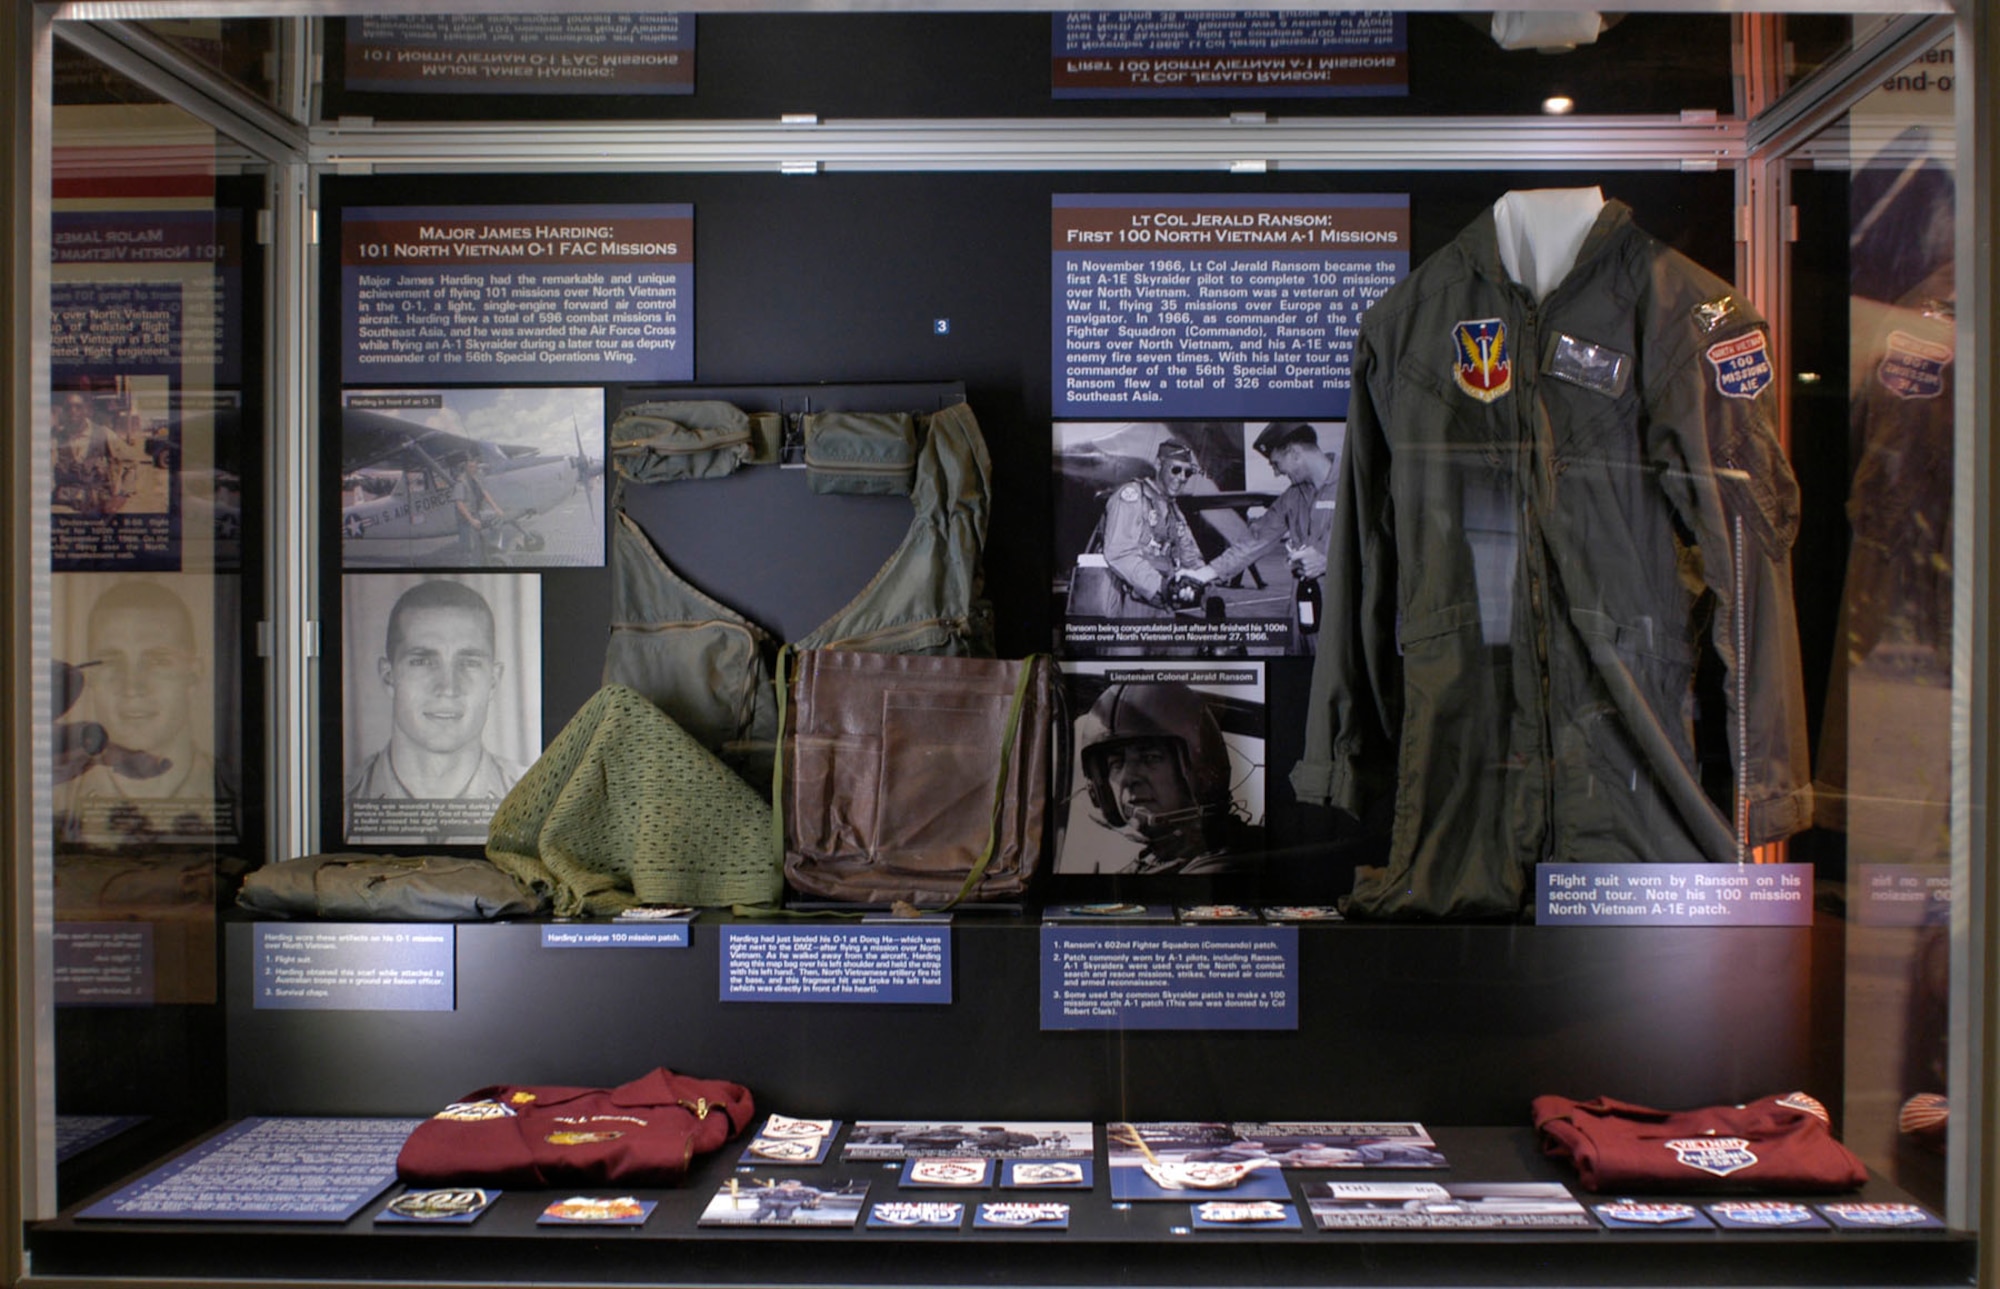 DAYTON, Ohio - On display (top right) Flight suit worn by Lt. Col. Jerald Ransom on his second tour. Note his 100 missions North Vietnam A-1E patch. Ransom’s 602nd Fighter Squadron (Commando) patch. A patch commonly worn by A-1 pilots, including Ransom. A-1 Skyraiders were used over the North on combat search and rescue missions, strikes, forward air control, and armed reconnaissance. Some used the common Skyraider patch to make a 100 missions north A-1 patch (The one on display was donated by Col. Robert Clark). (U.S. Air Force photo)